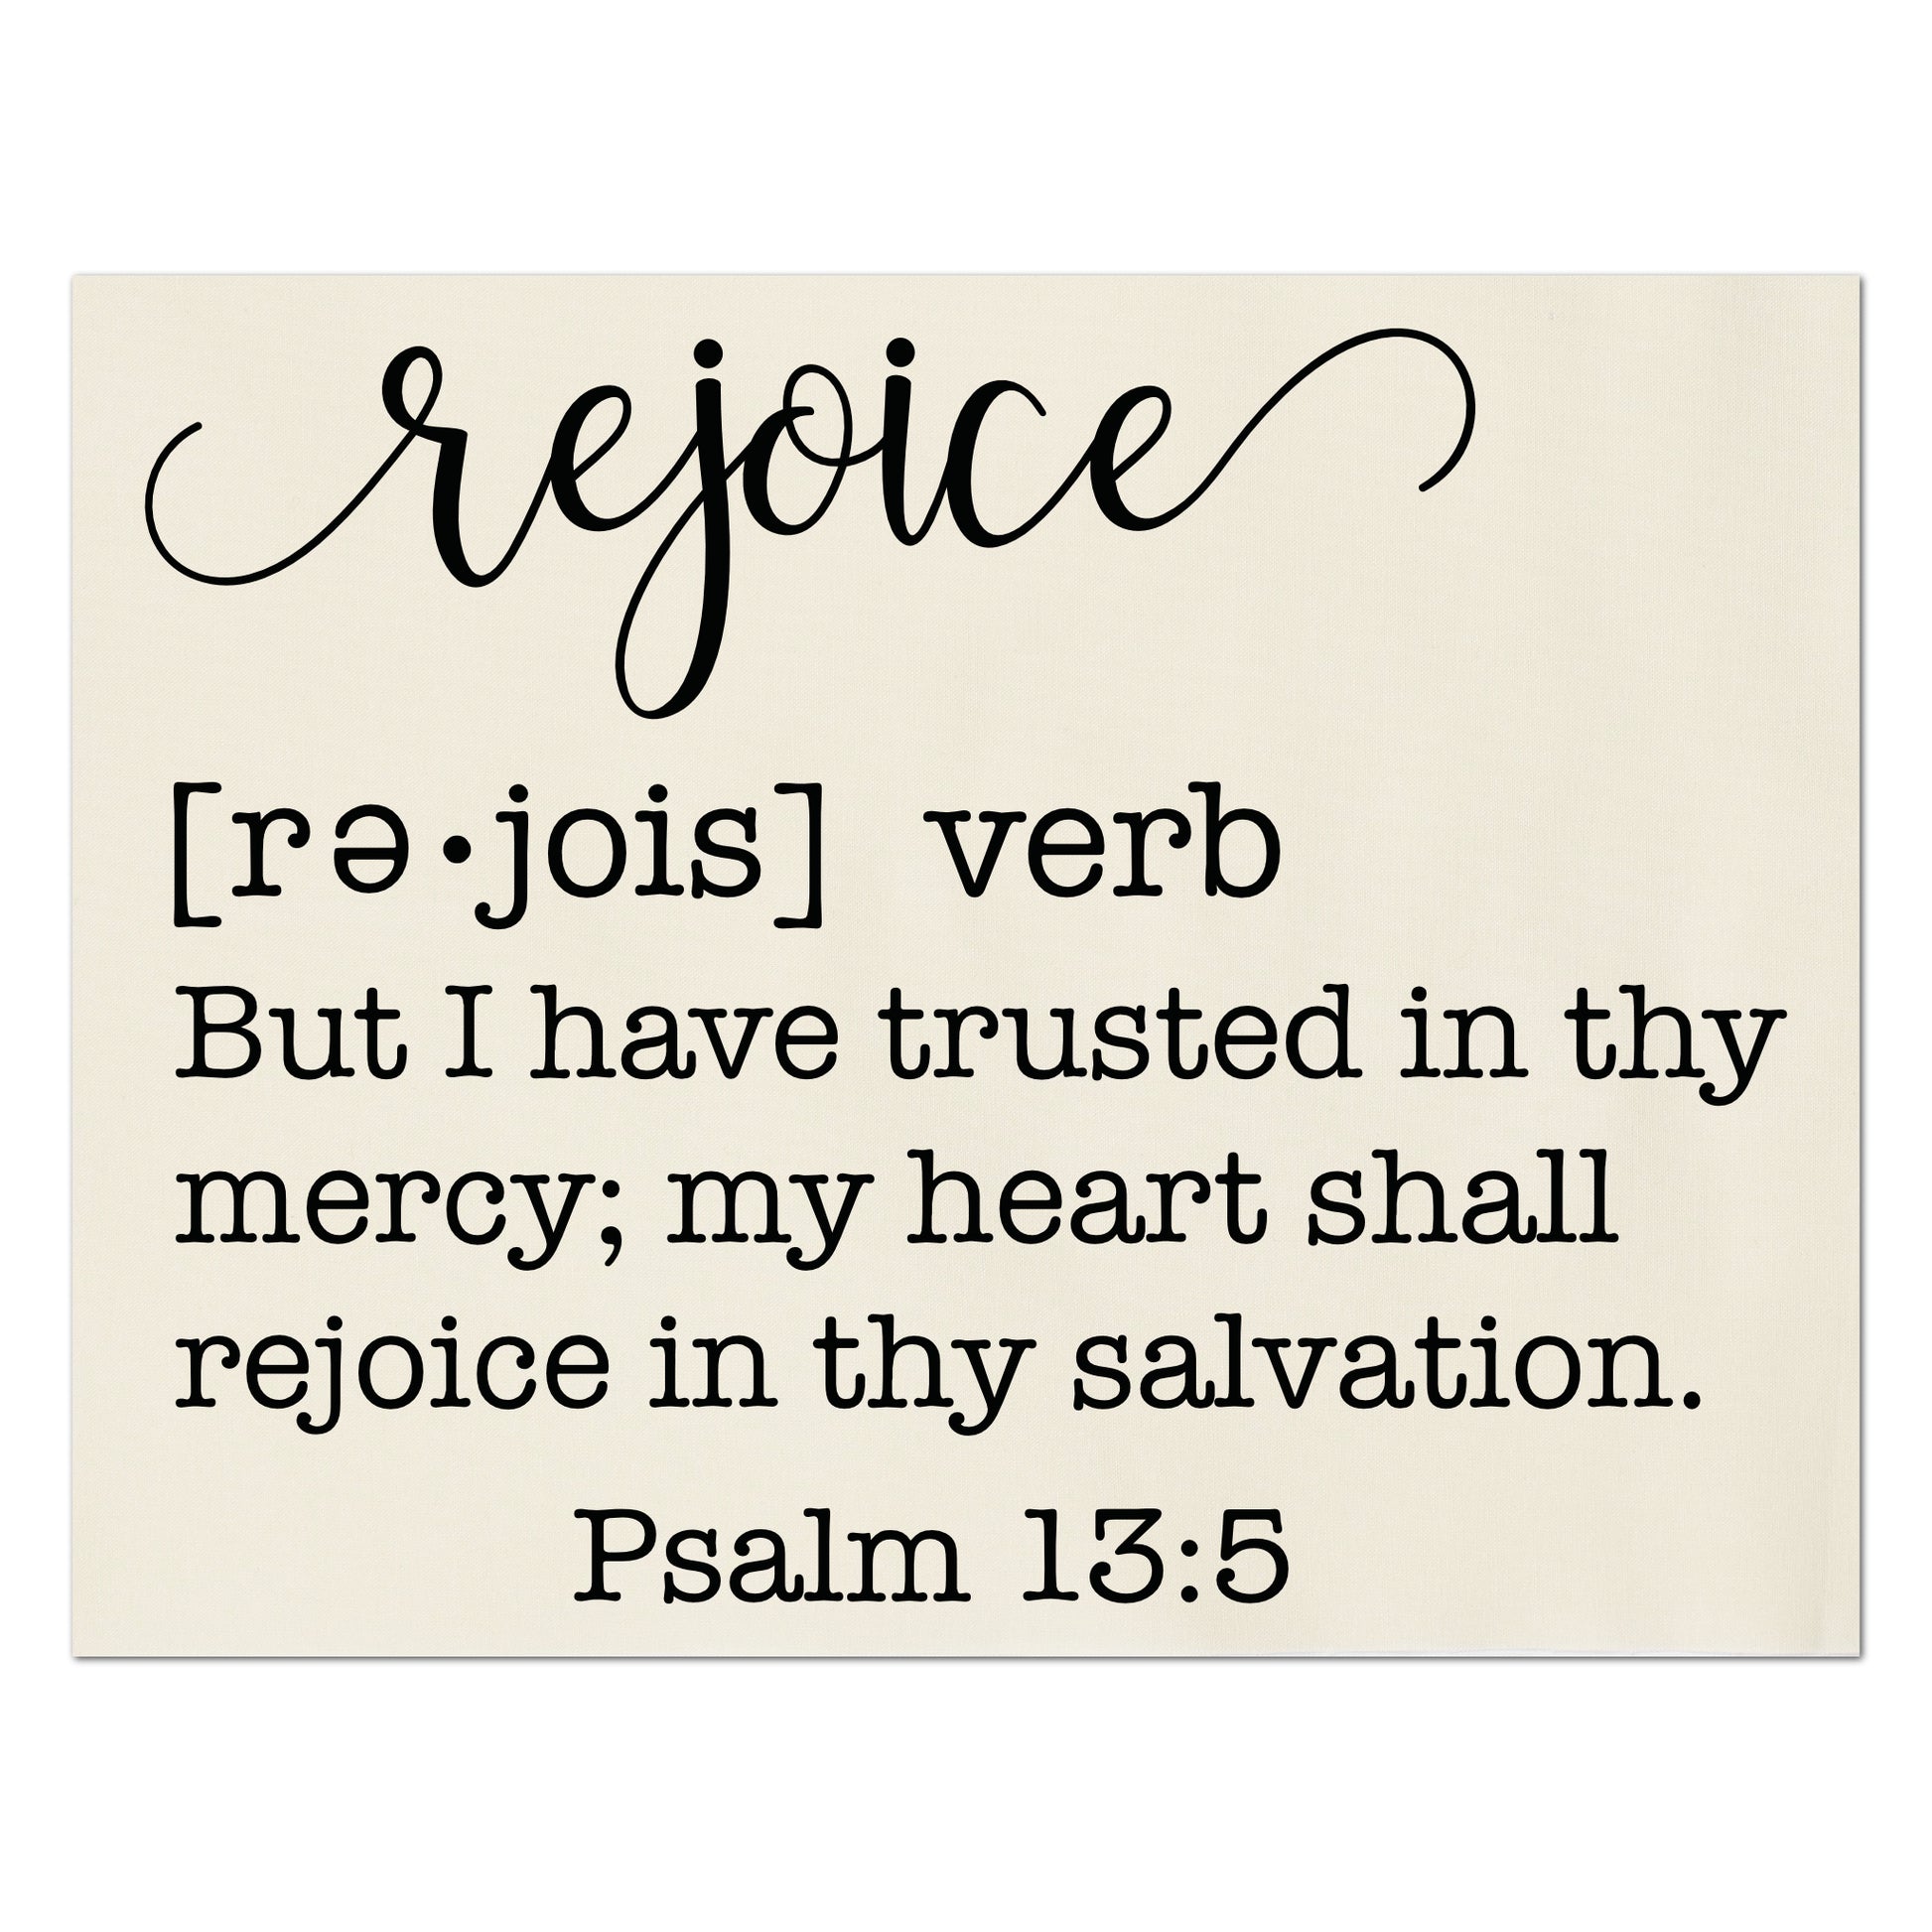 Rejoice - Christian Fabric - But I have trusted in thy mercy; my heart shall rejoice in thy salvation - Psalm 13:5